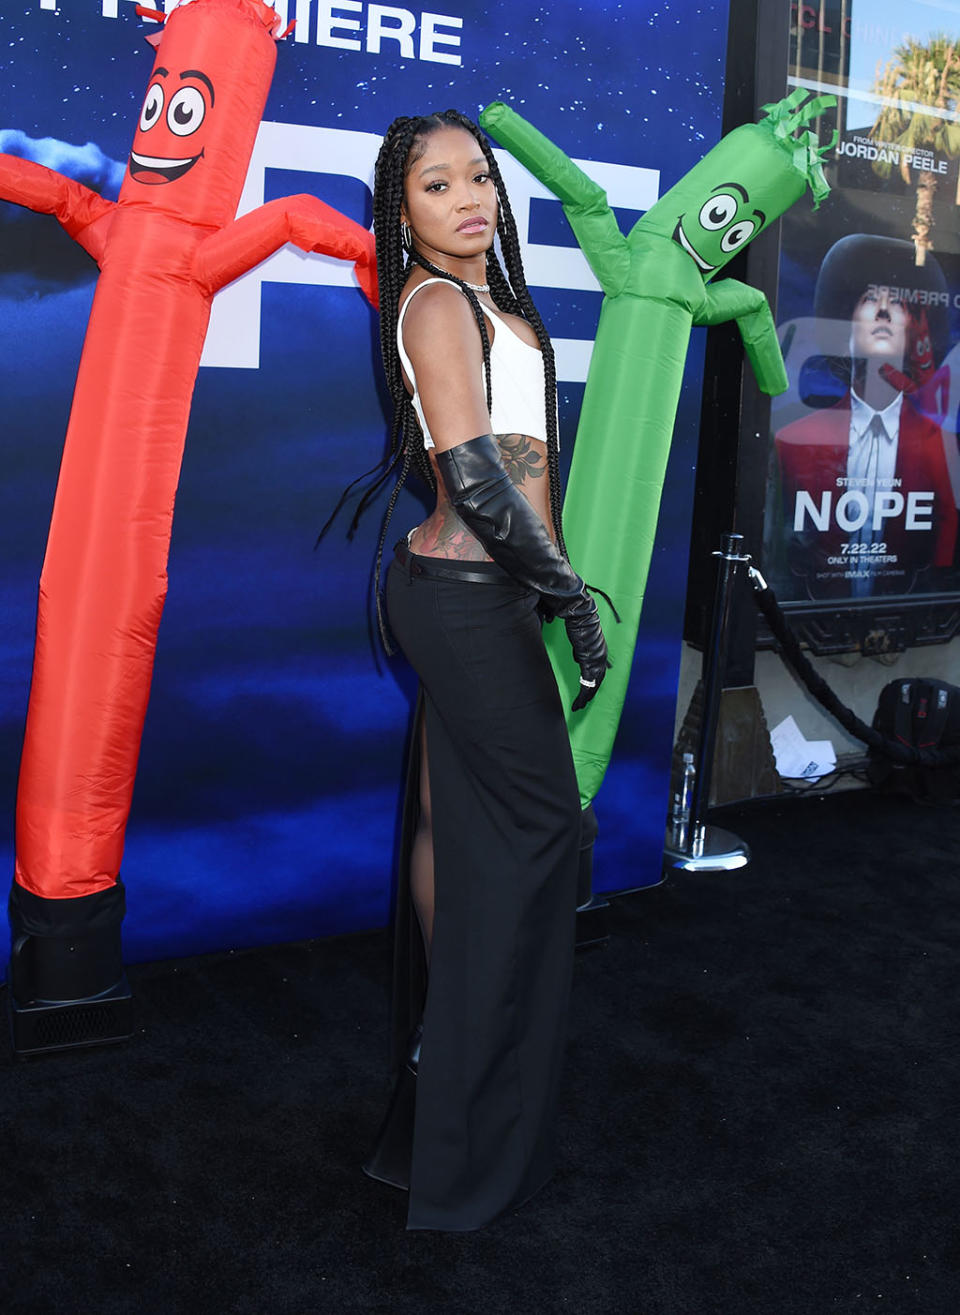 Keke Palmer at ‘Nope’ world premiere held at TCL Chinese 6 Theatre on July 18, 2022 in Los Angeles, California. - Credit: Gilbert Flores for Variety